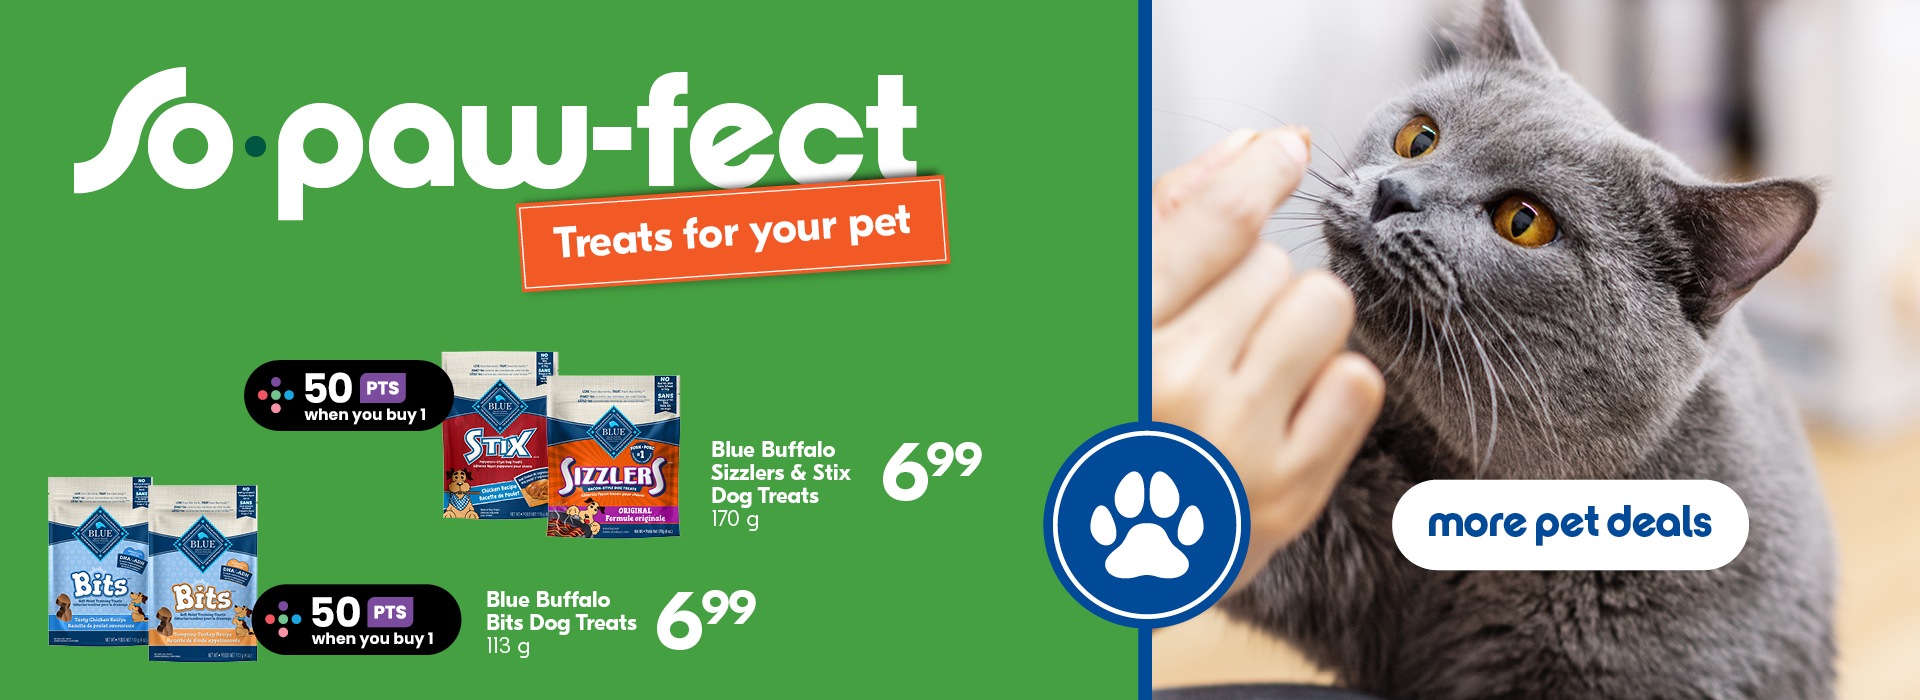 The image has the following text, "So paw-fect, Treats for your pet, 50 PTS when you buy 1, Blue Buffalo Sizzlers & Stix Dog Treats 170g, at $6.99. 50 PTS when you buy 1, Blue Buffalo Bits Dog Treats 113g, Buy at $6.99."